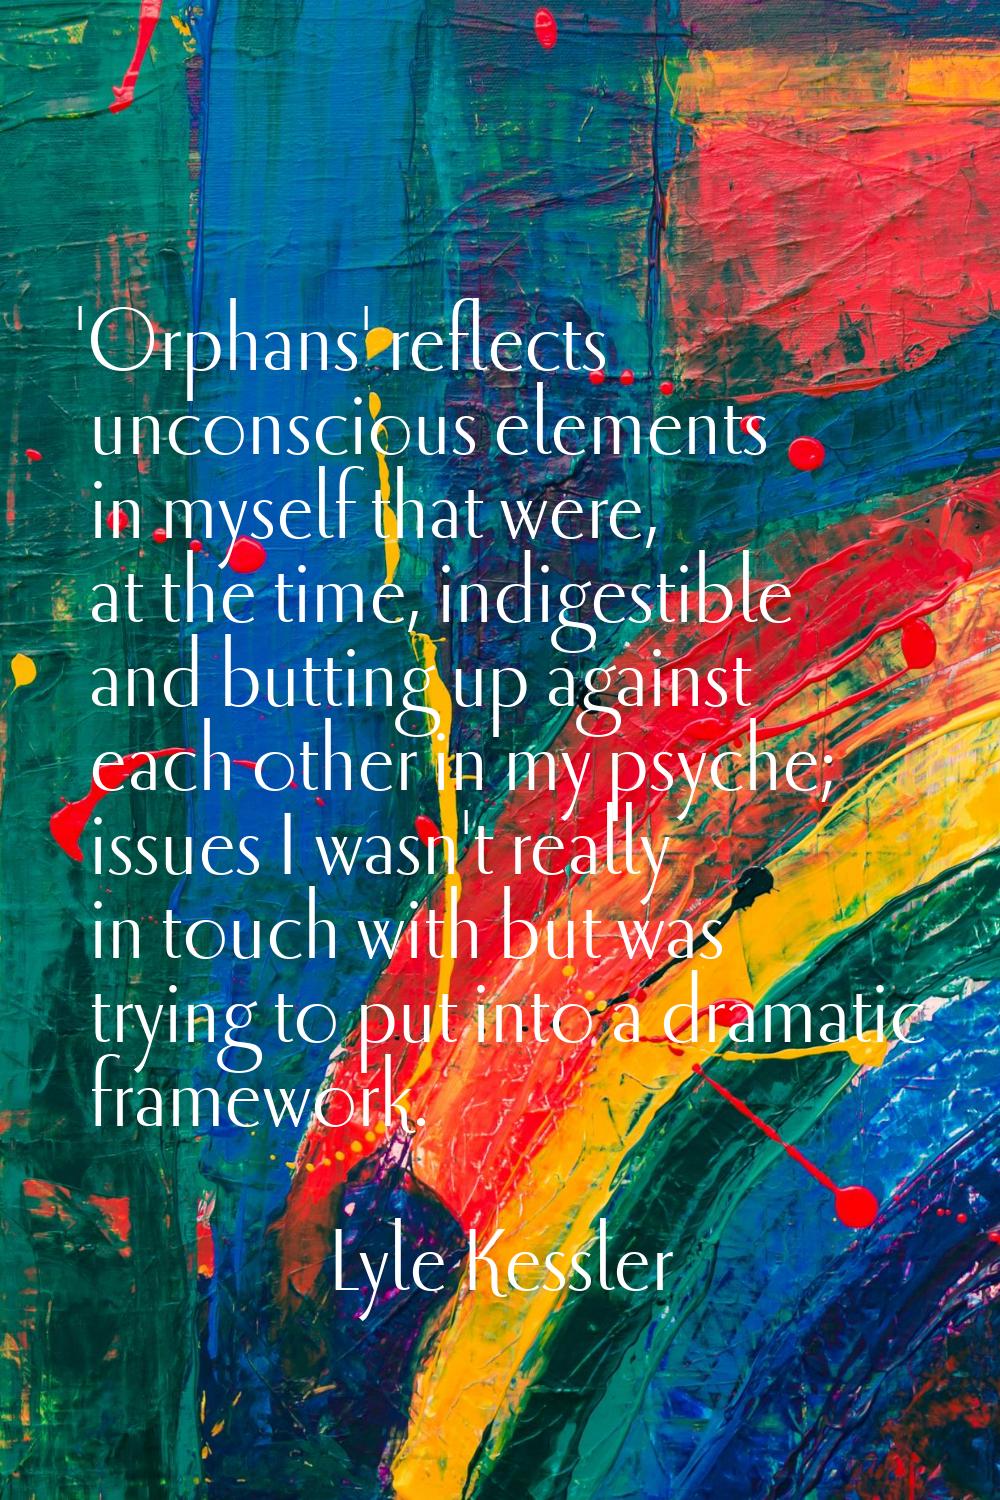 'Orphans' reflects unconscious elements in myself that were, at the time, indigestible and butting 